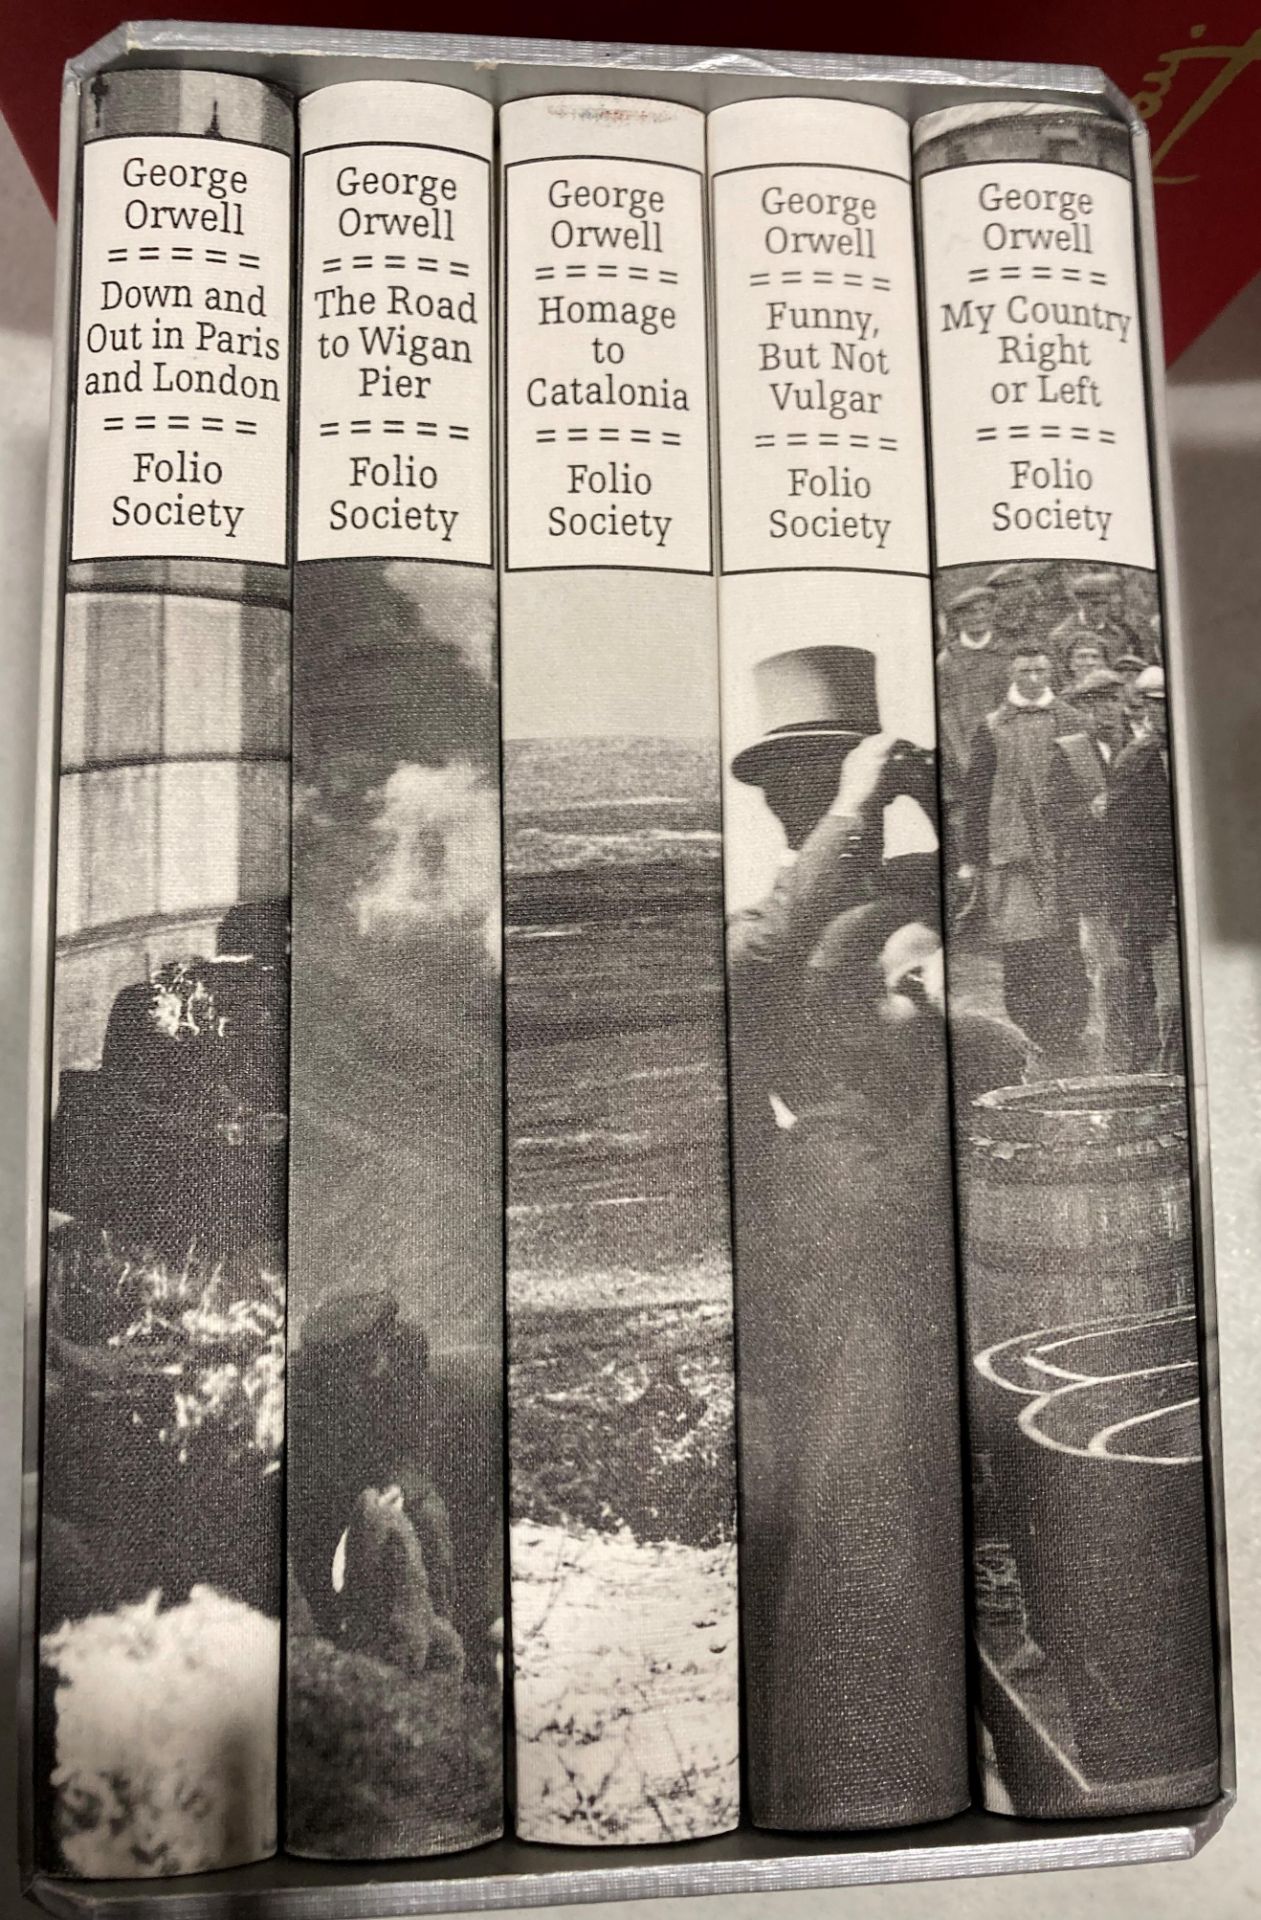 Folio Society - George Orwell a boxed set of five books - 'Down and Out in Paris & London',